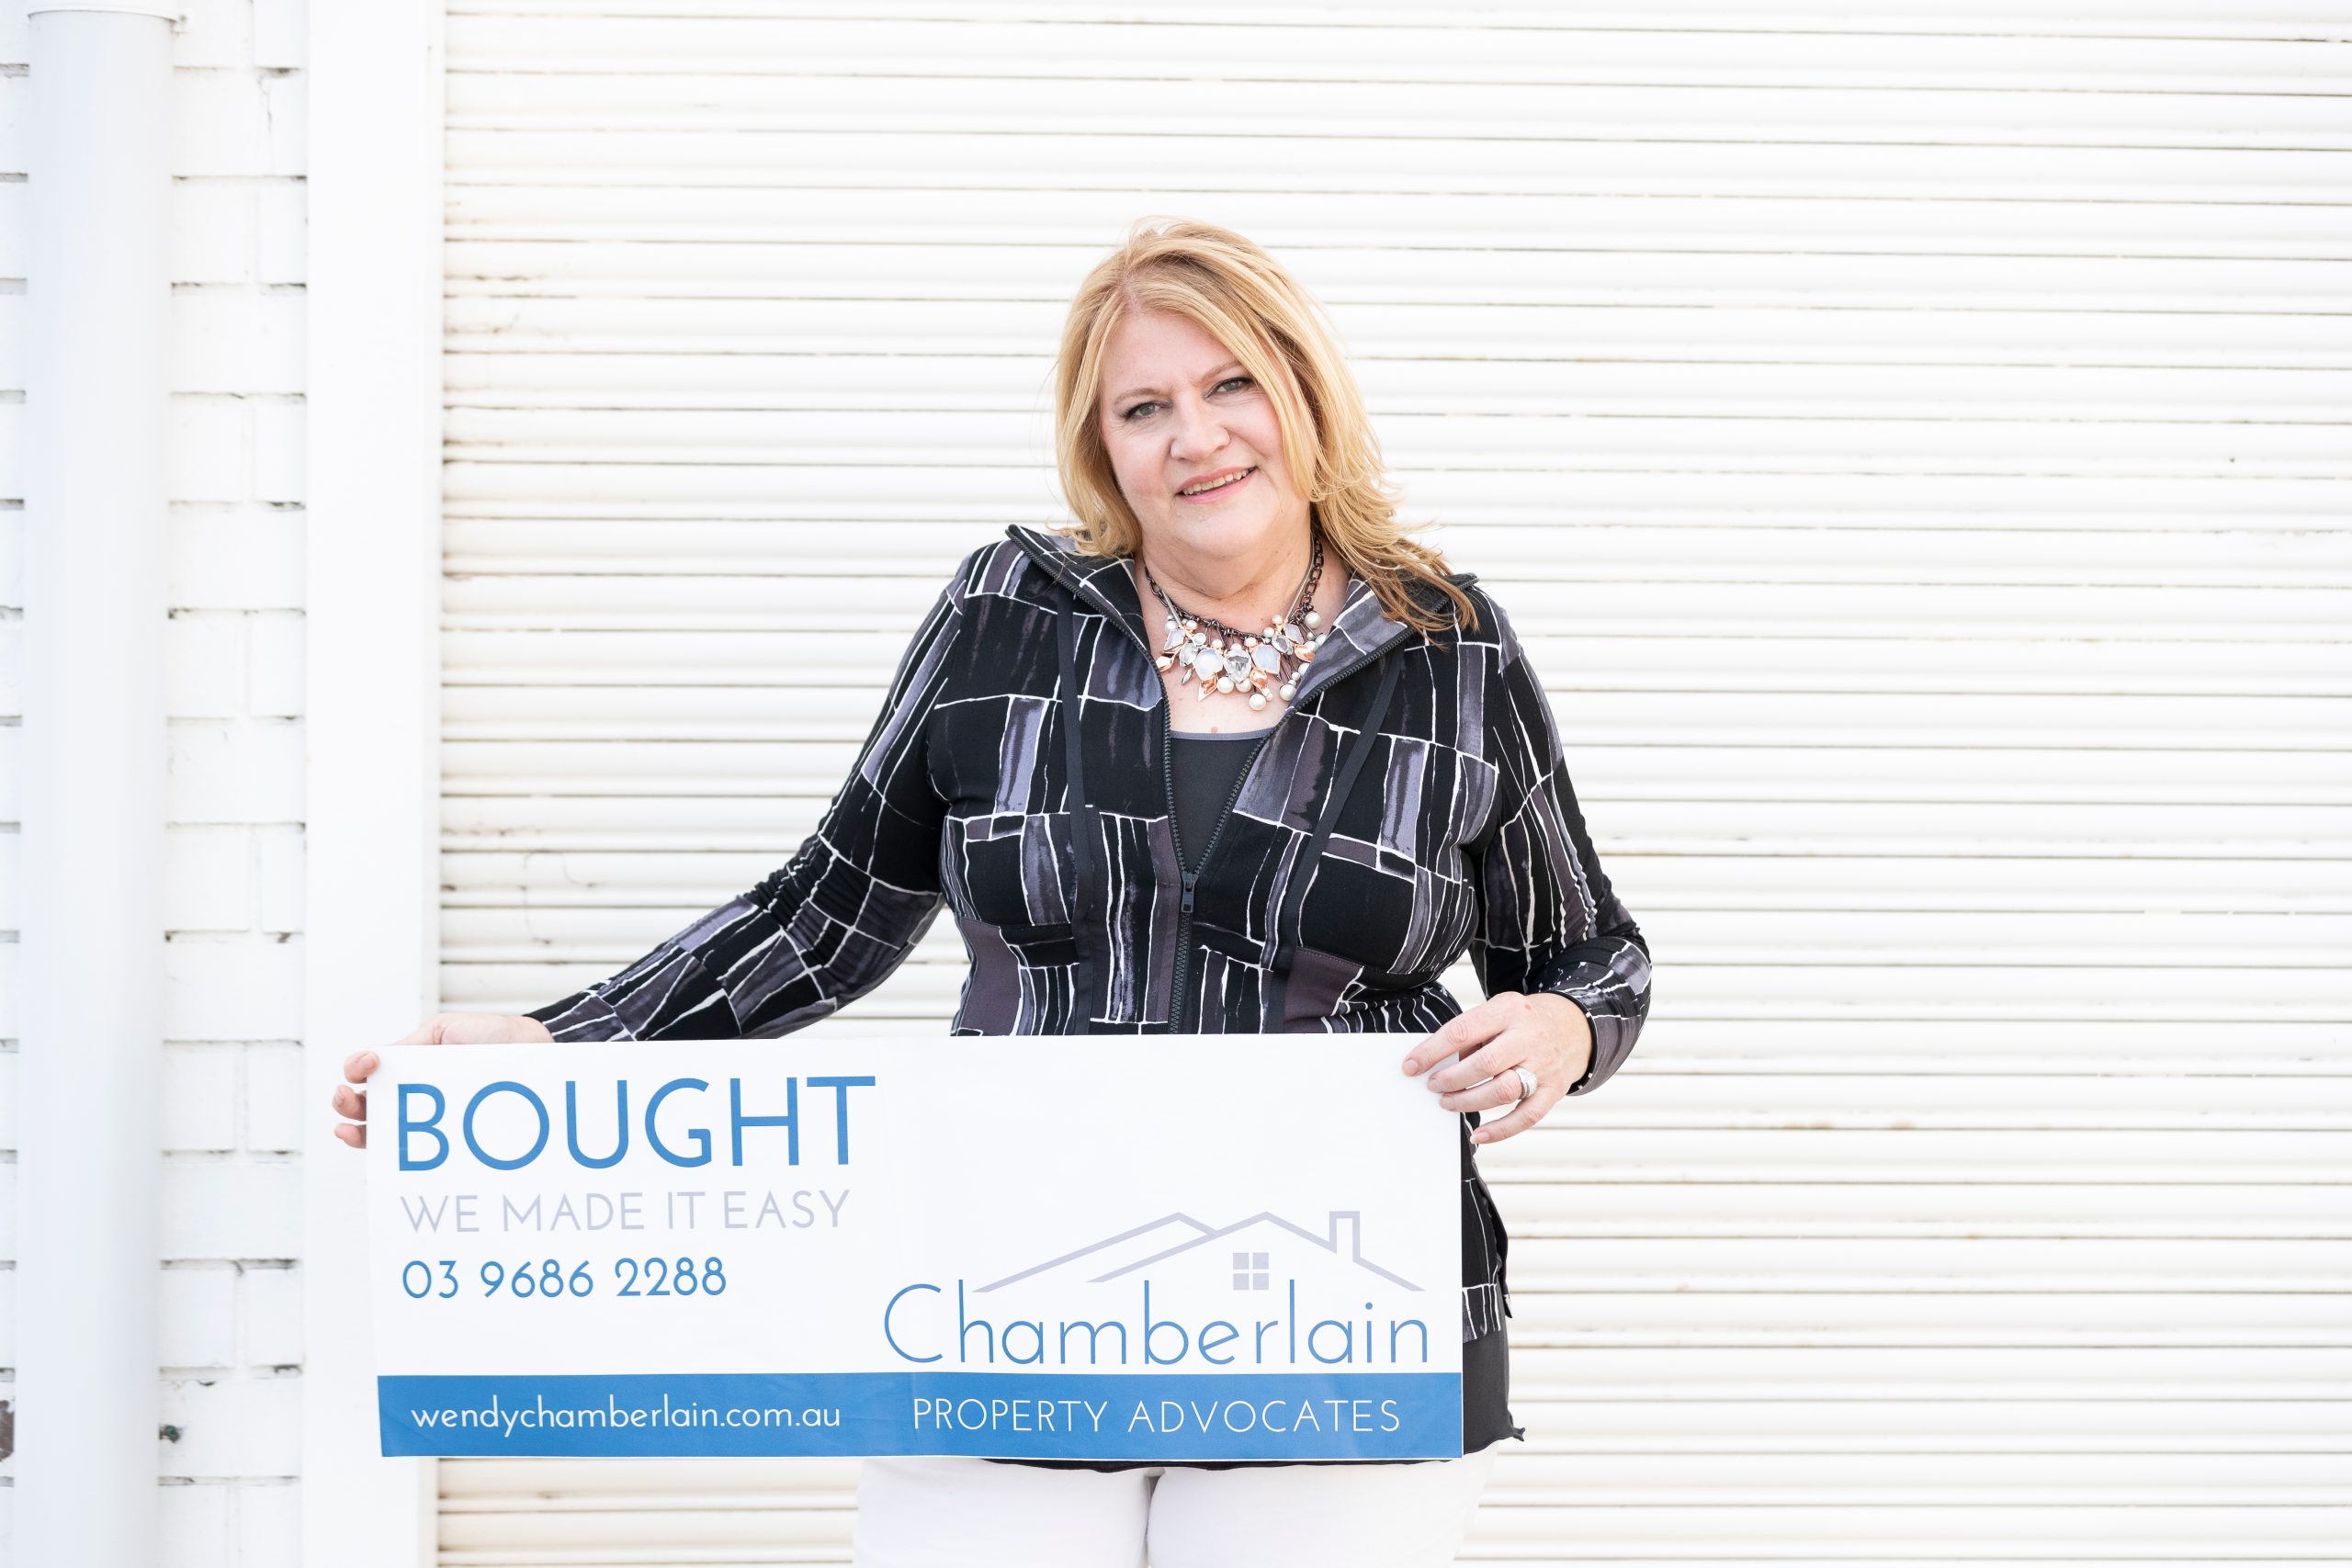 Wendy Chamberlain Melbourne Buyers advocate holding a Chamberlains BOUGHT sticker